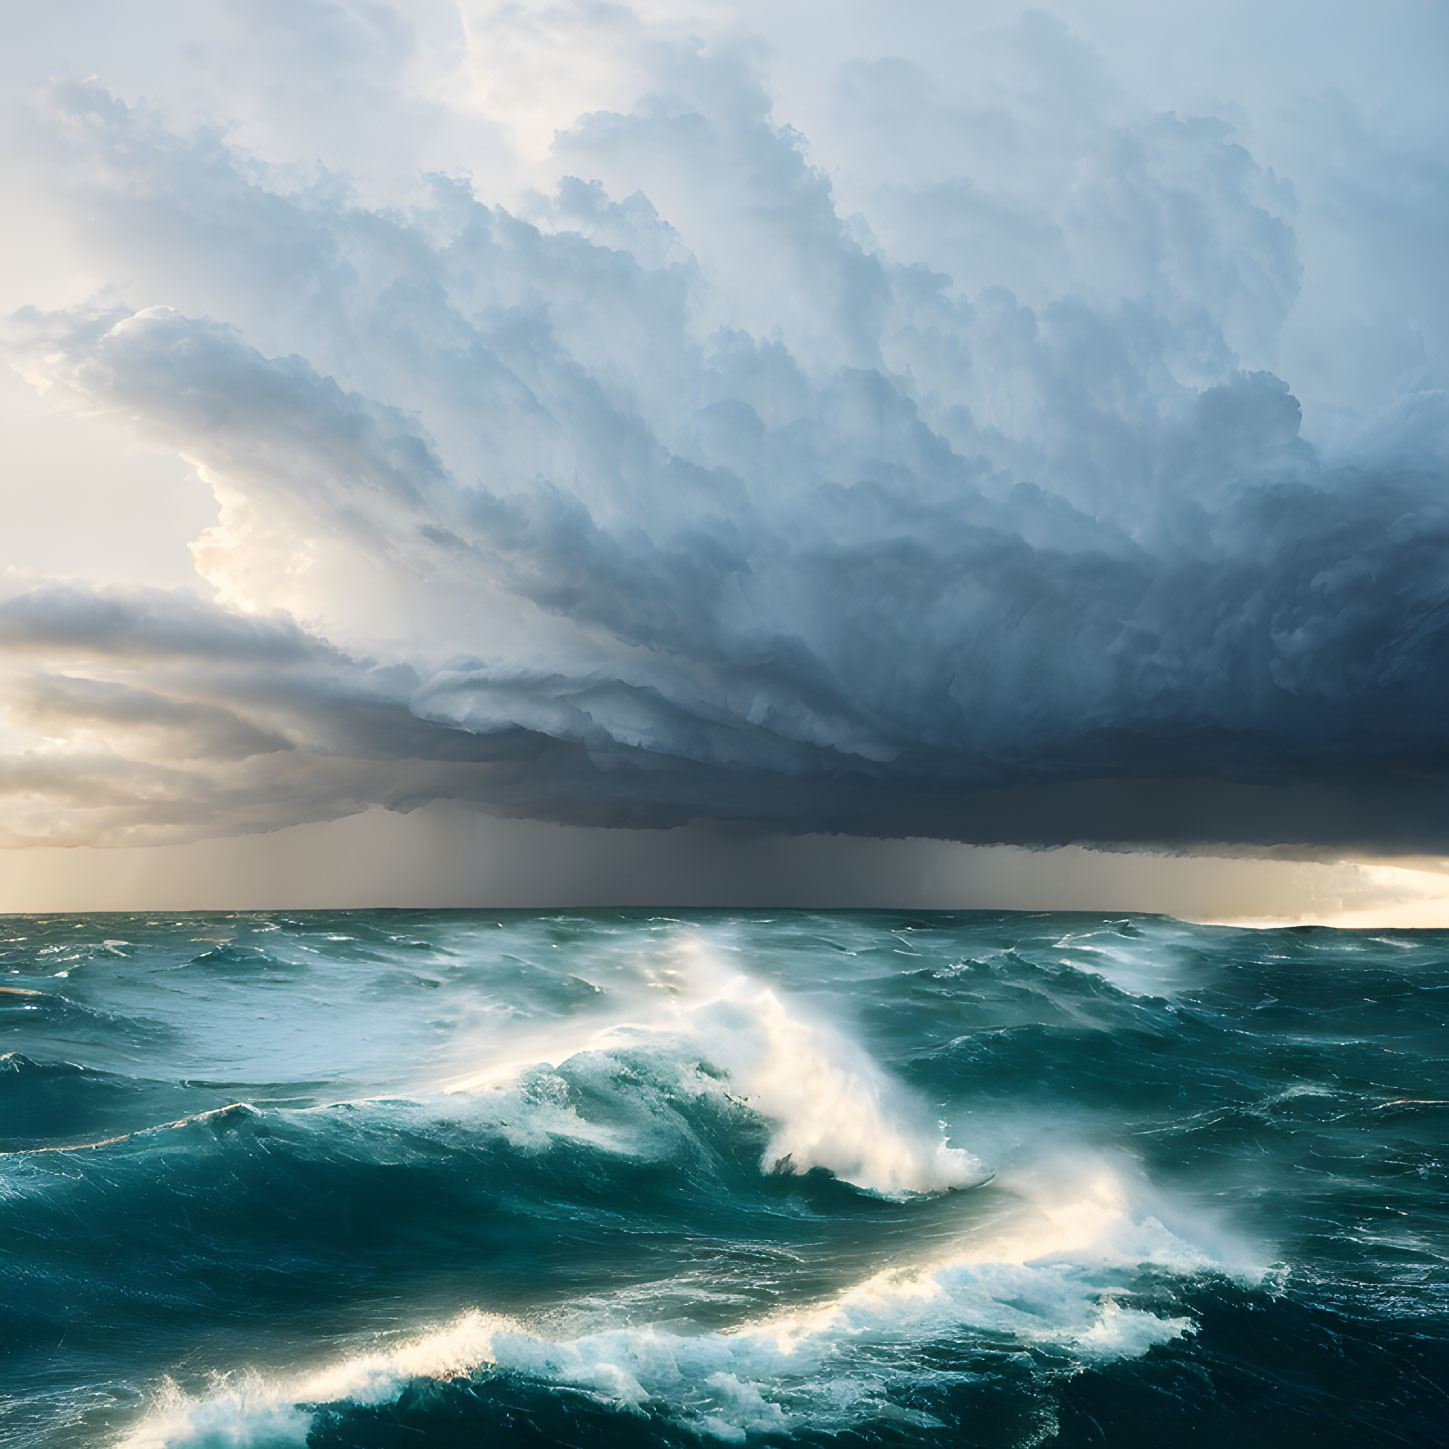 Dramatic Ocean Scene with Turbulent Waves and Ominous Storm Cloud